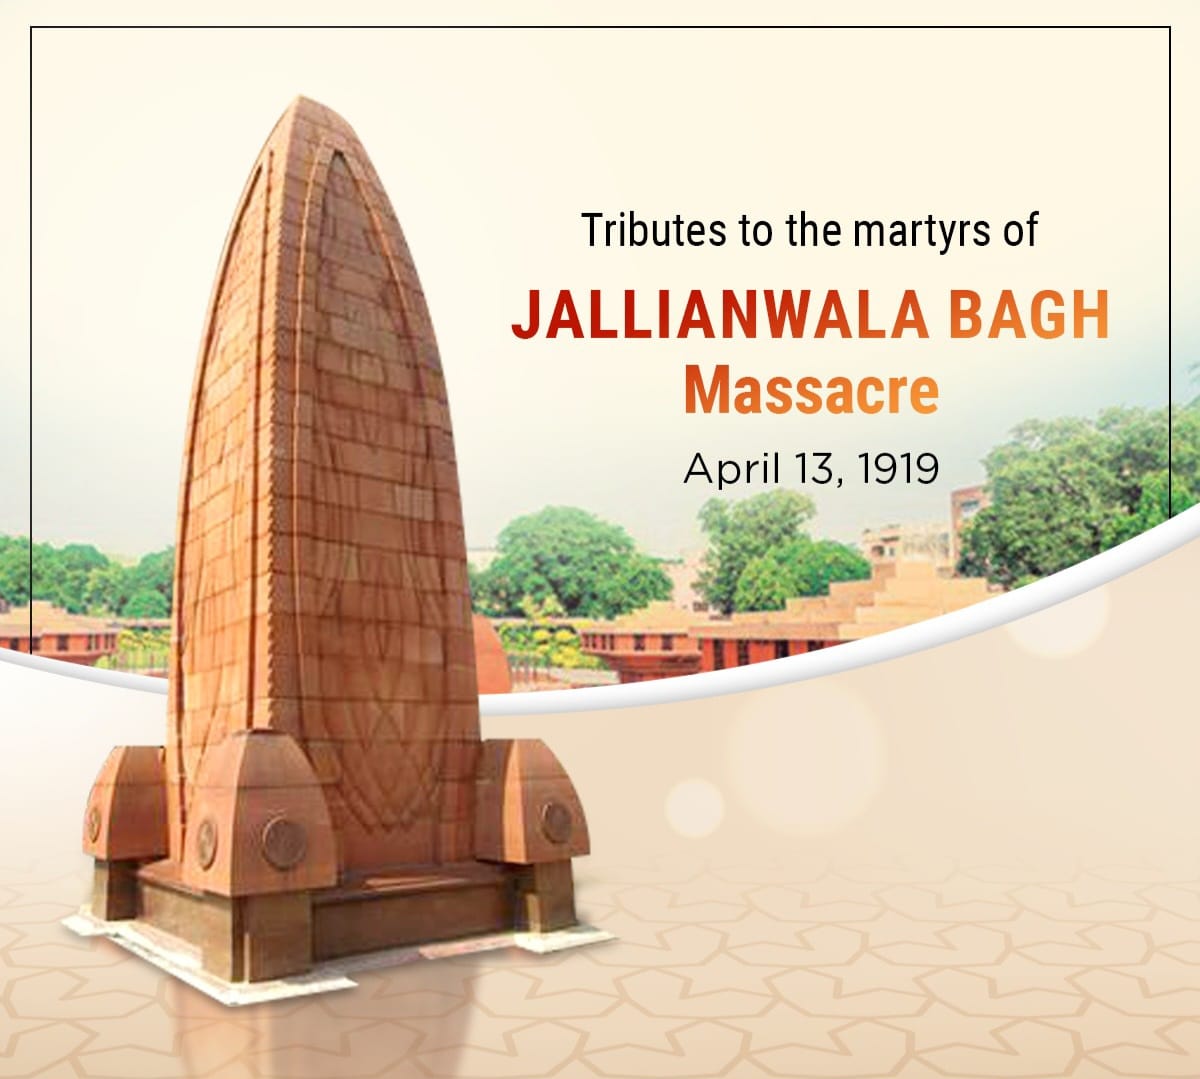 My tributes to all the martyrs of #jallianwalabagh Massacre. Their sacrifice for the freedom of motherland from the clutches of colonialism has ignited many minds and inspired millions of Indians in our independence struggle.